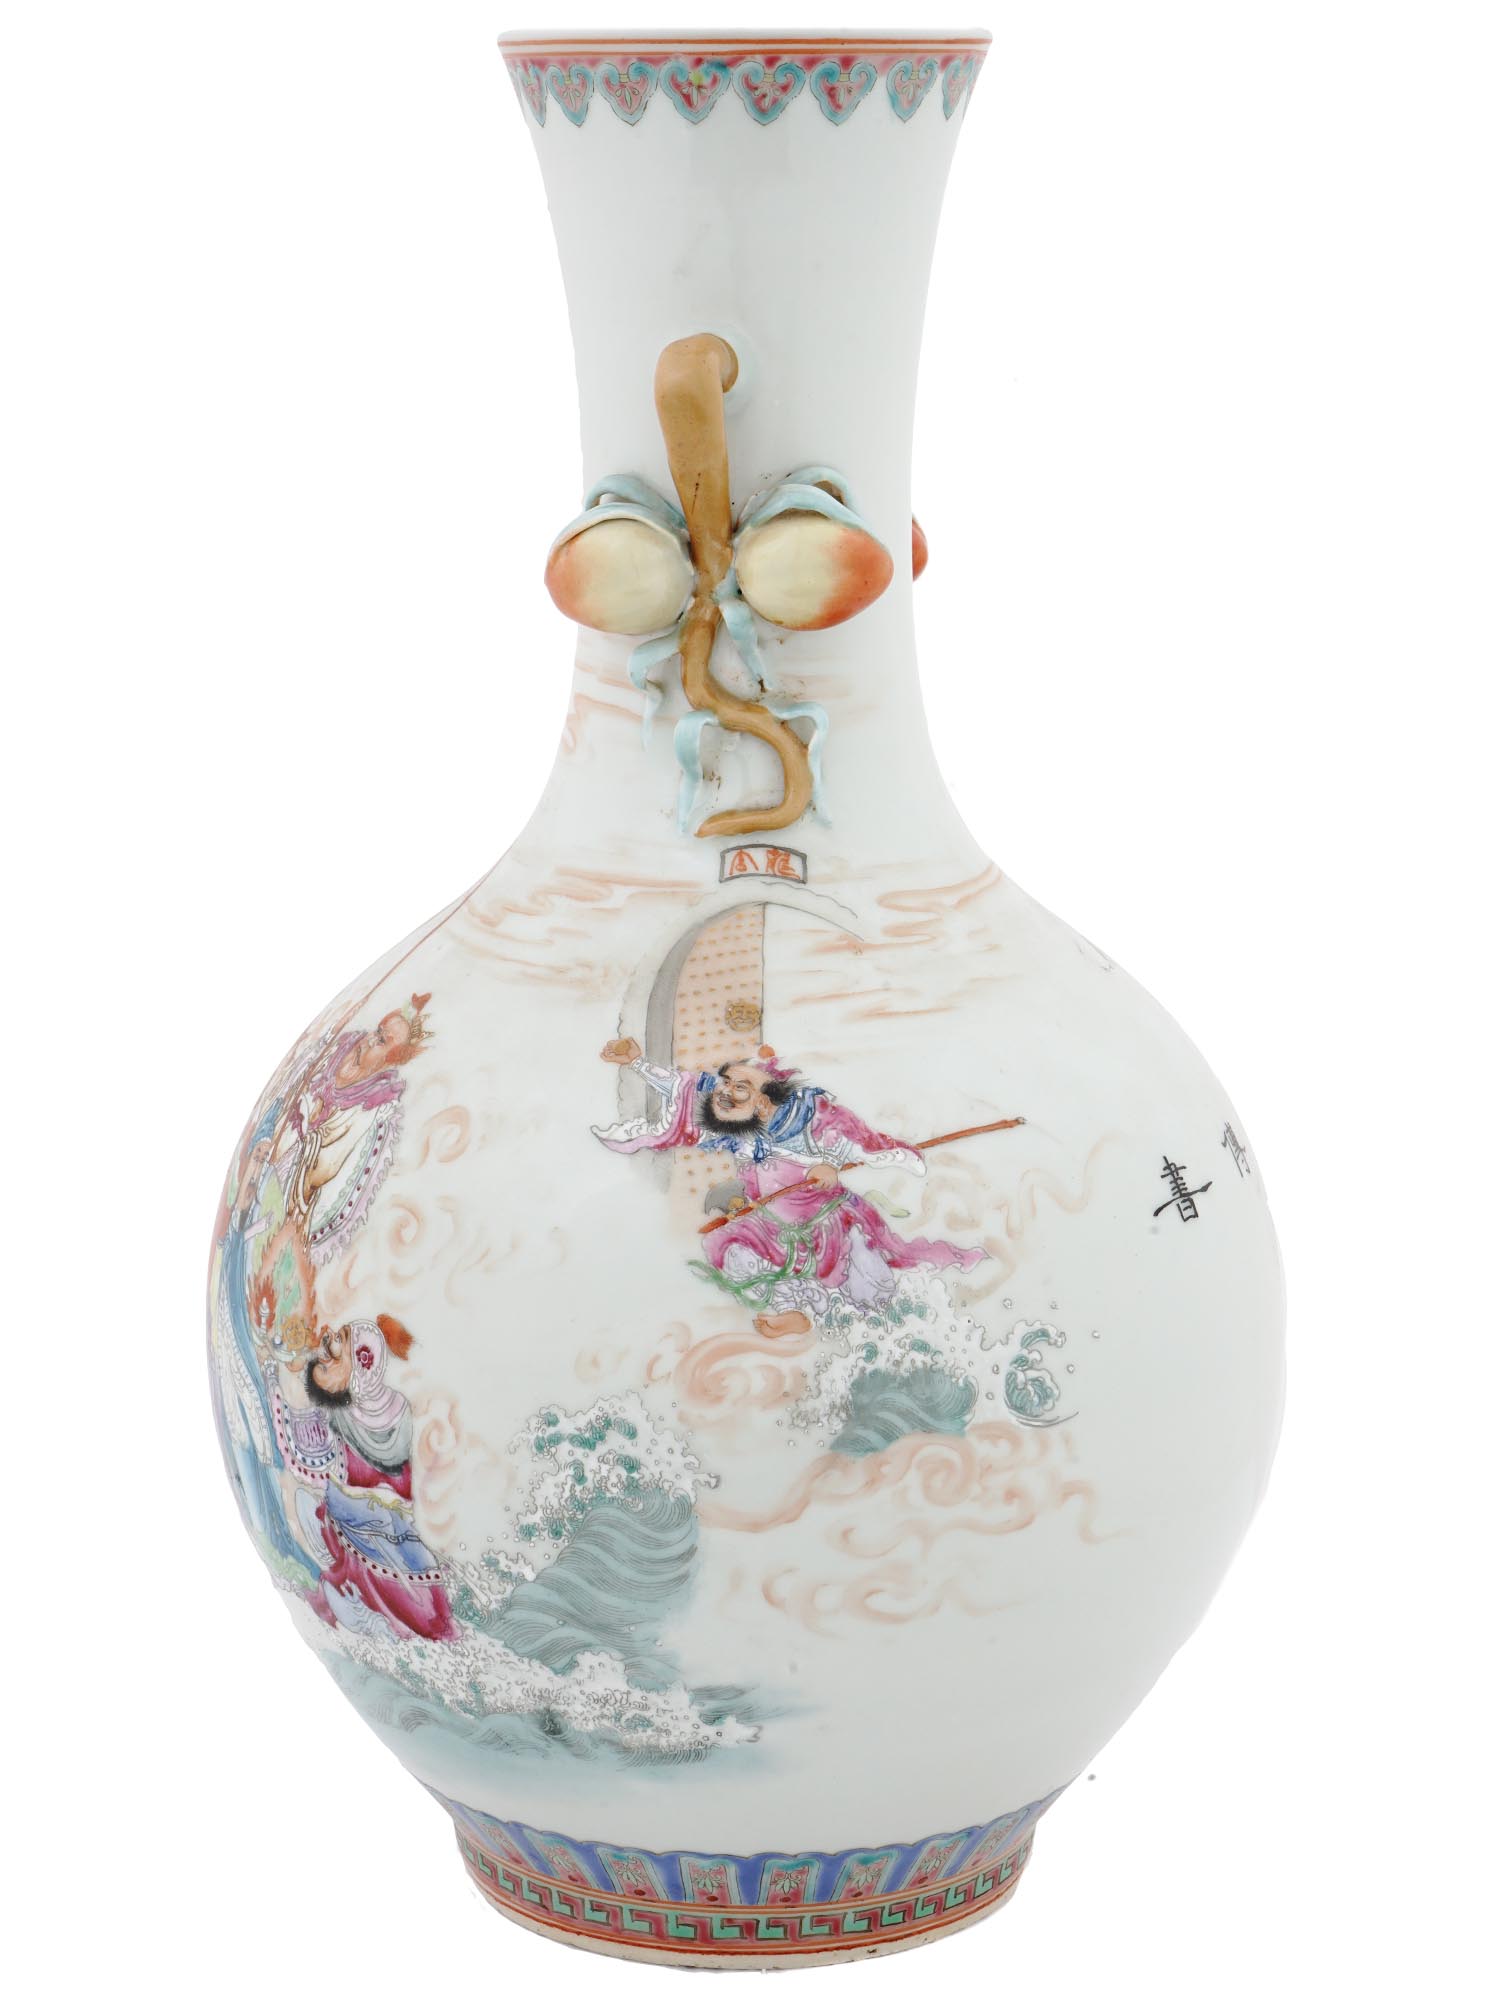 ANTIQUE CHINESE QING DYNASTY PORCELAIN VASE PIC-2